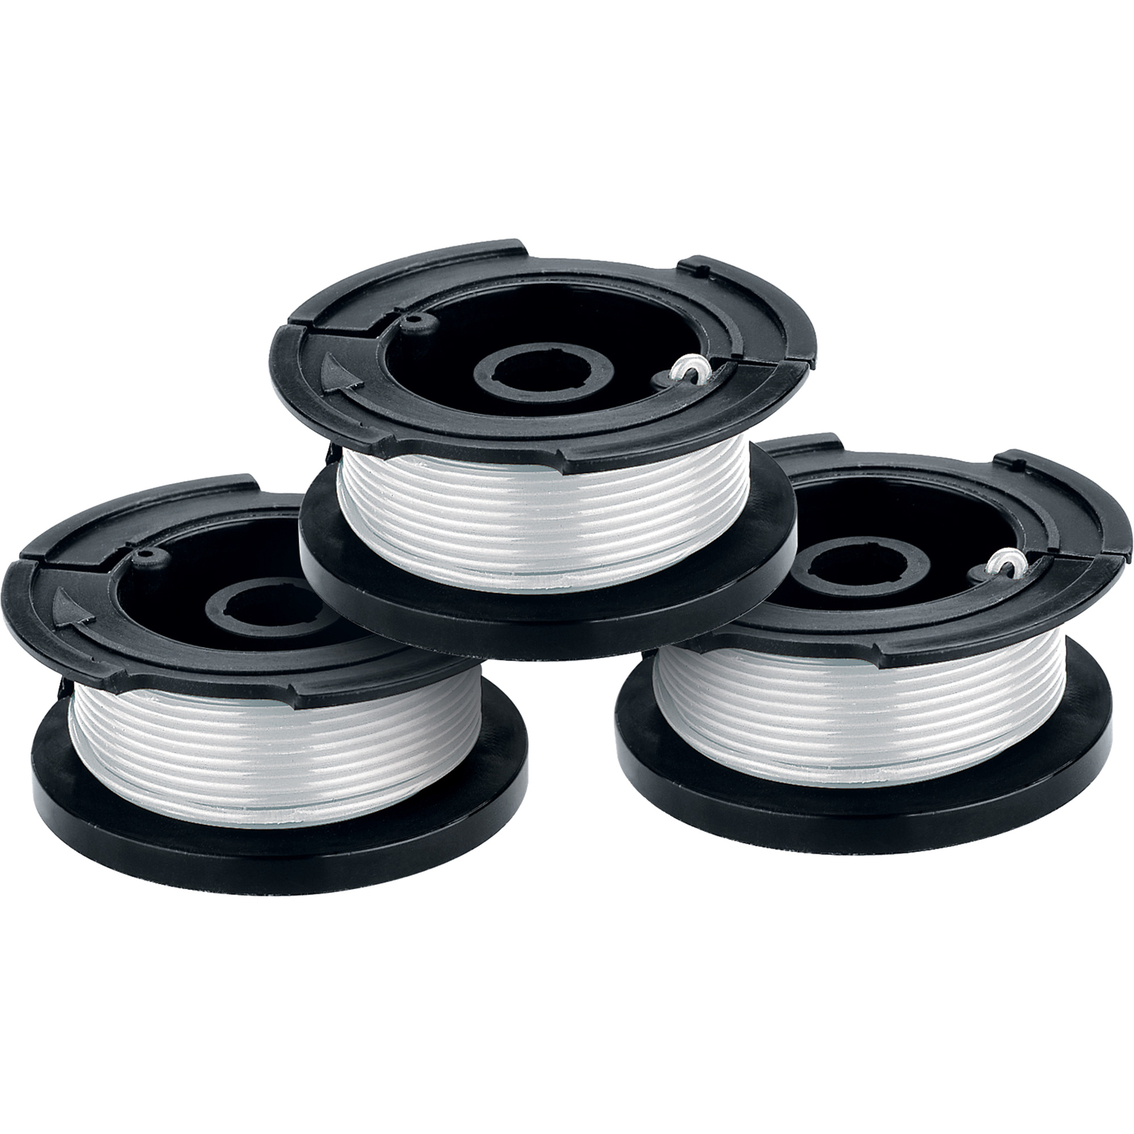 Black + Decker .065 In. Replacement Auto Feed Spool 3 Pk., Trimmers,  Edgers & Blowers, Patio, Garden & Garage